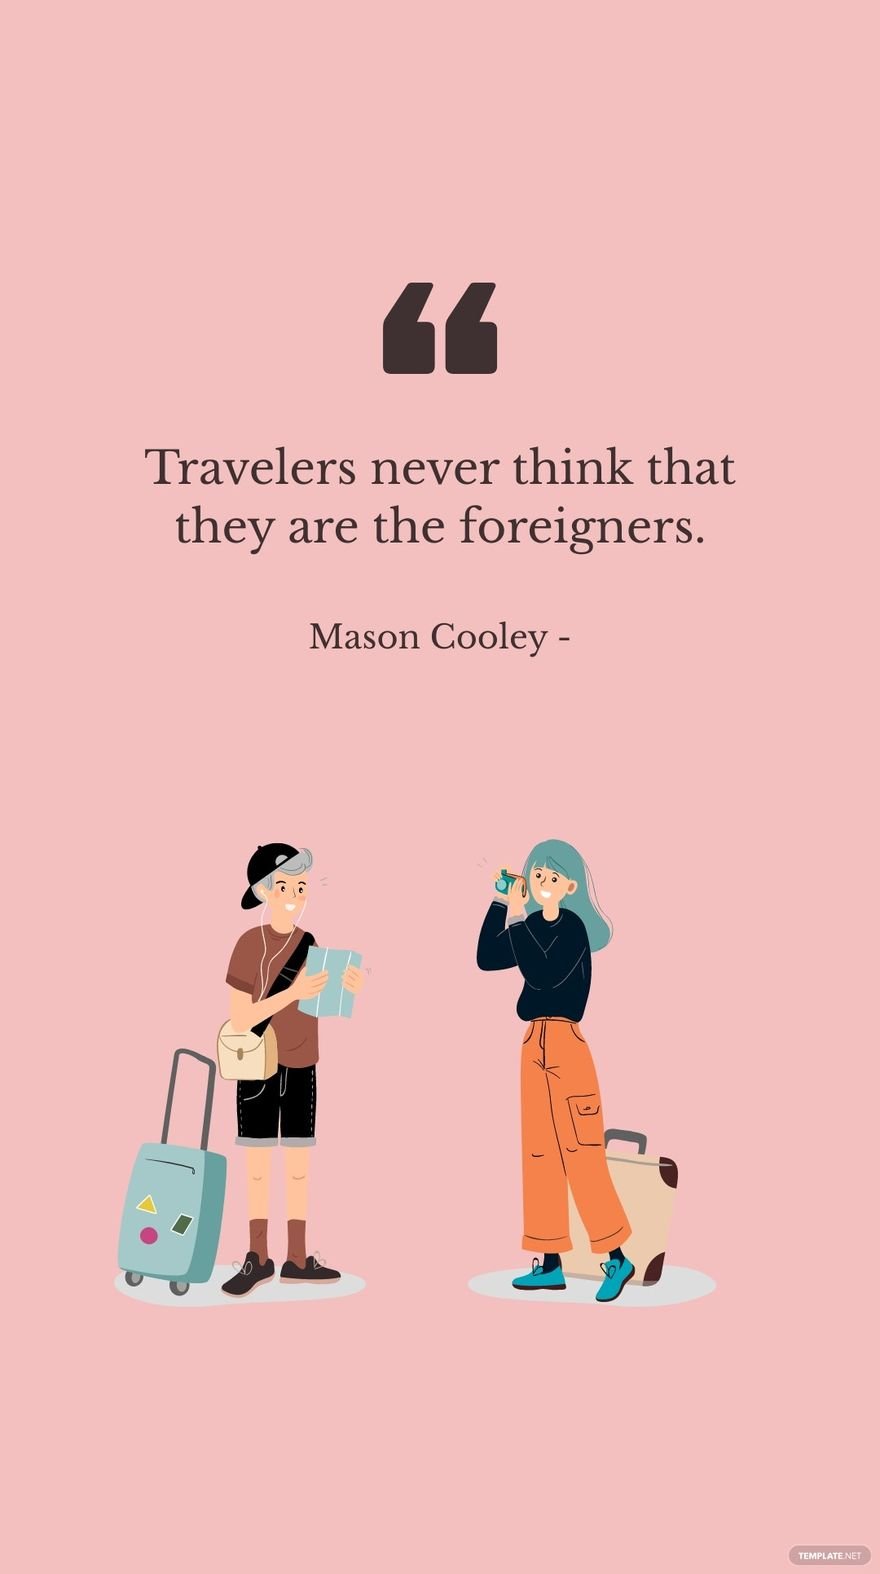 Free Mason Cooley - Travelers never think that they are the foreigners. in JPG